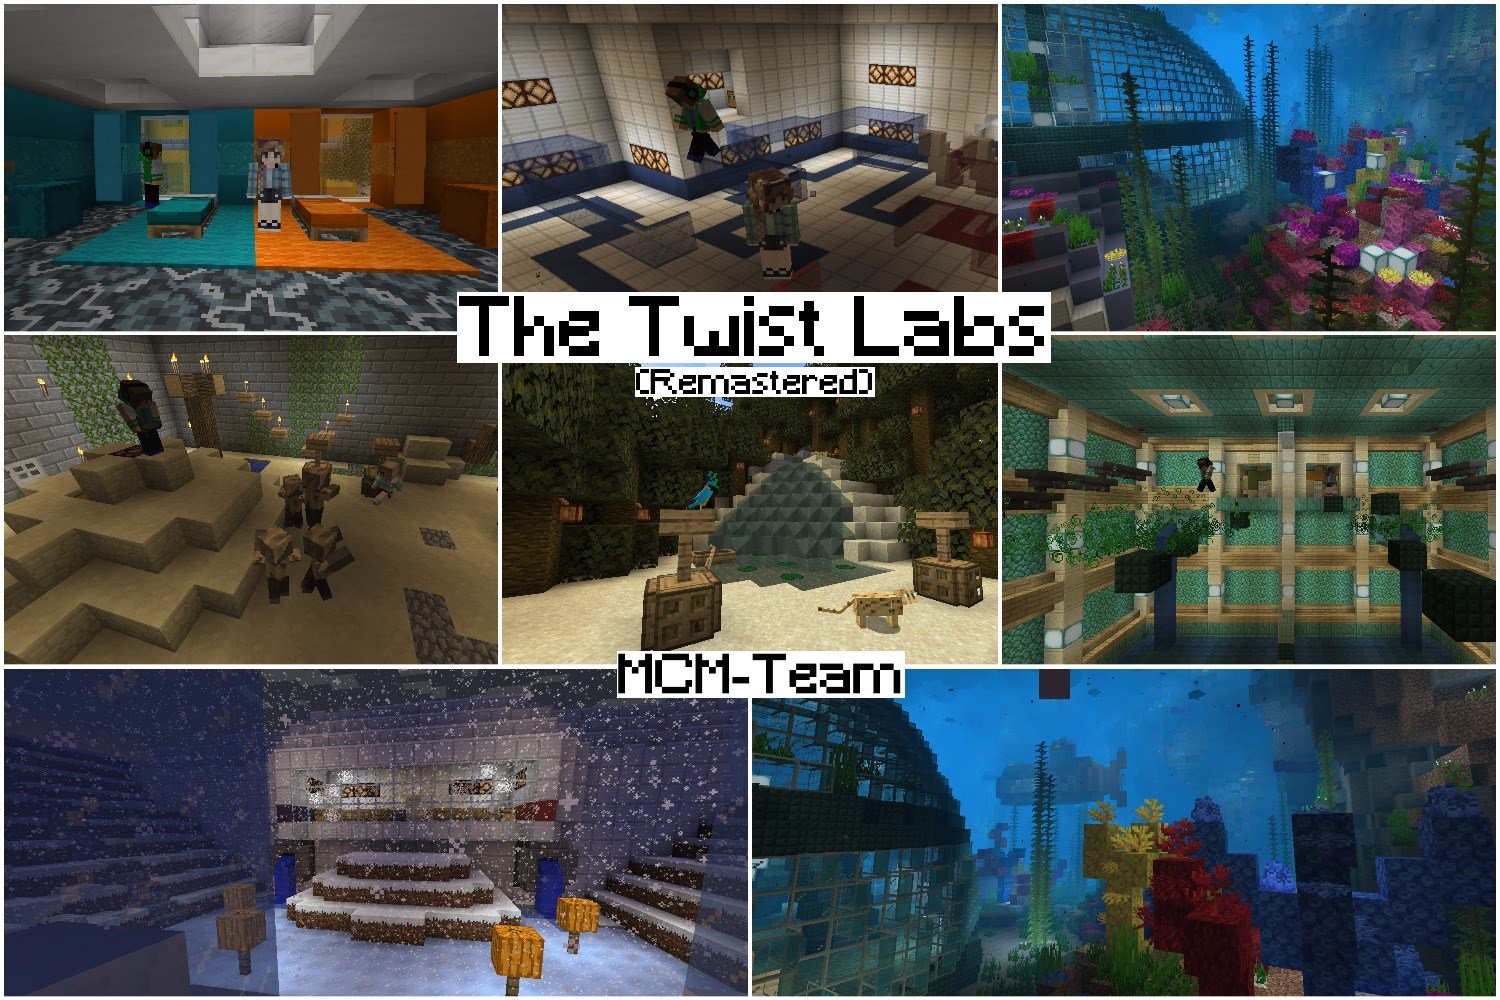 Download The Twist Labs (Remastered) for Minecraft 1.15.2